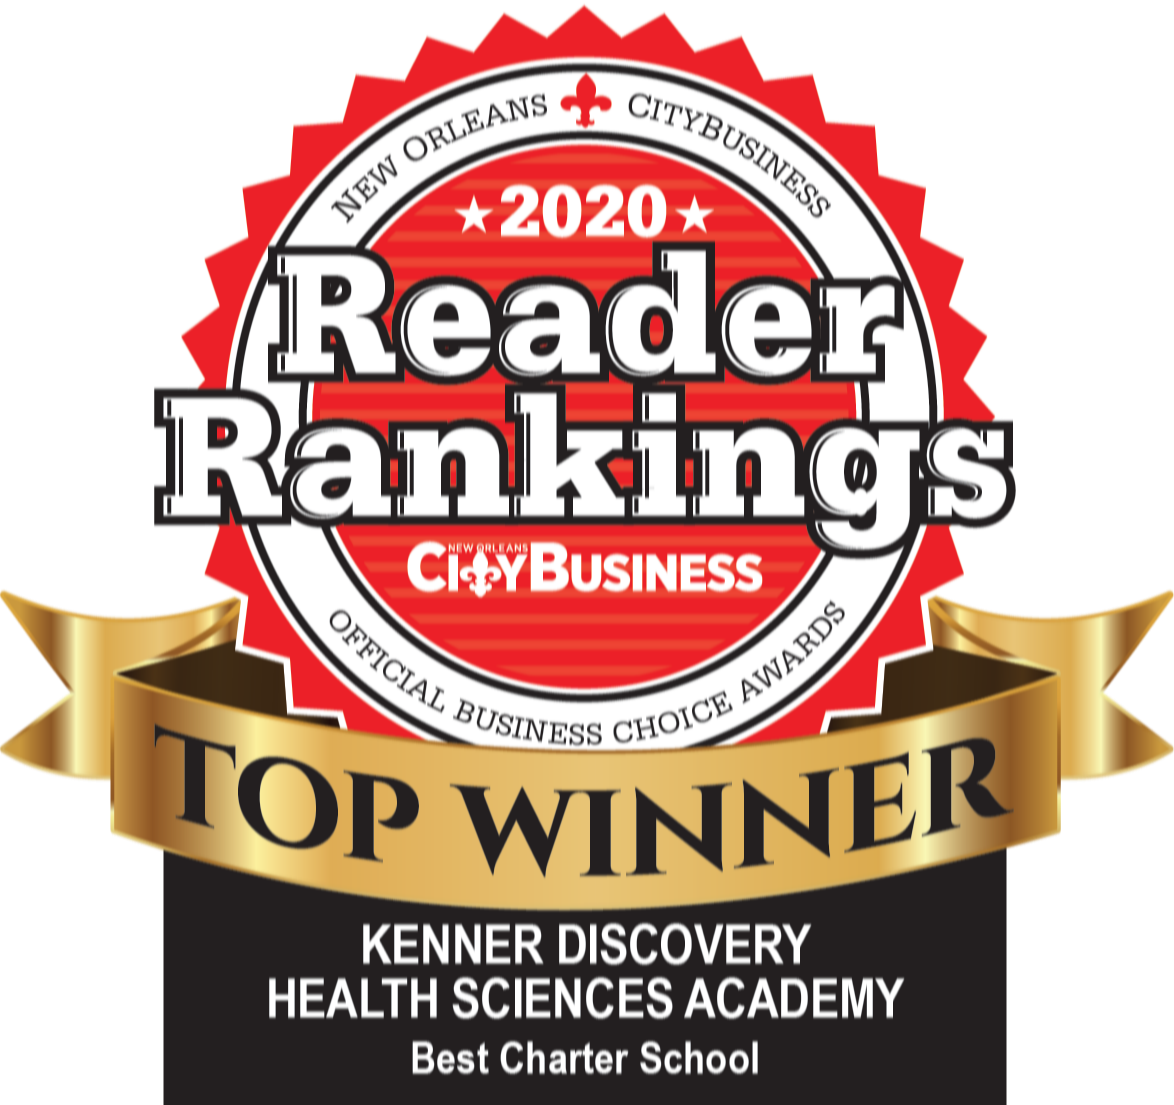 New Orleans 2020 Reader Rankings City Business Top Winner Kenner Discovery Health Sciences Academy Best Charter School